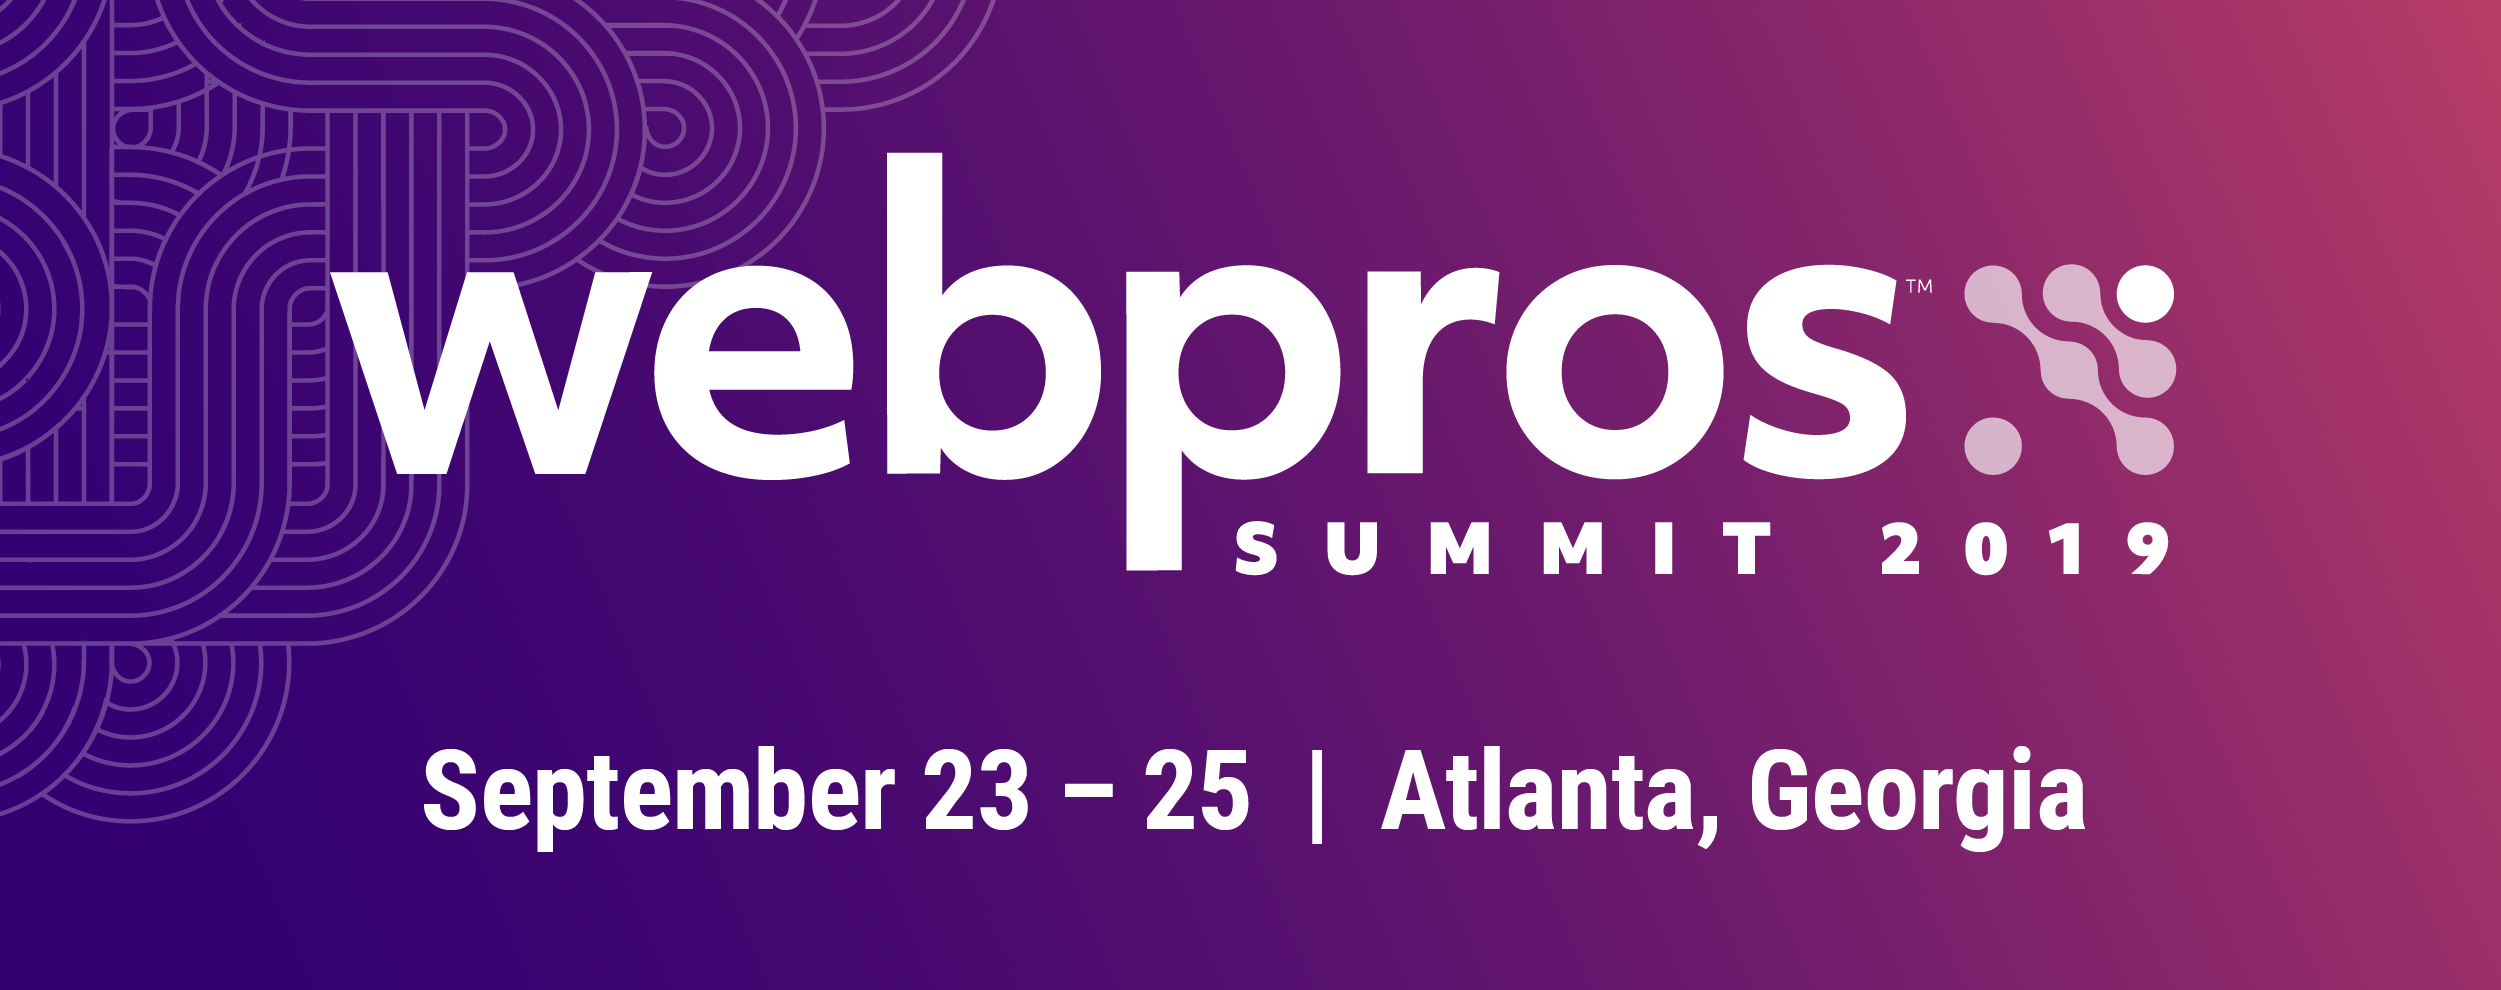 Welcome to WebPros Summit 2019!